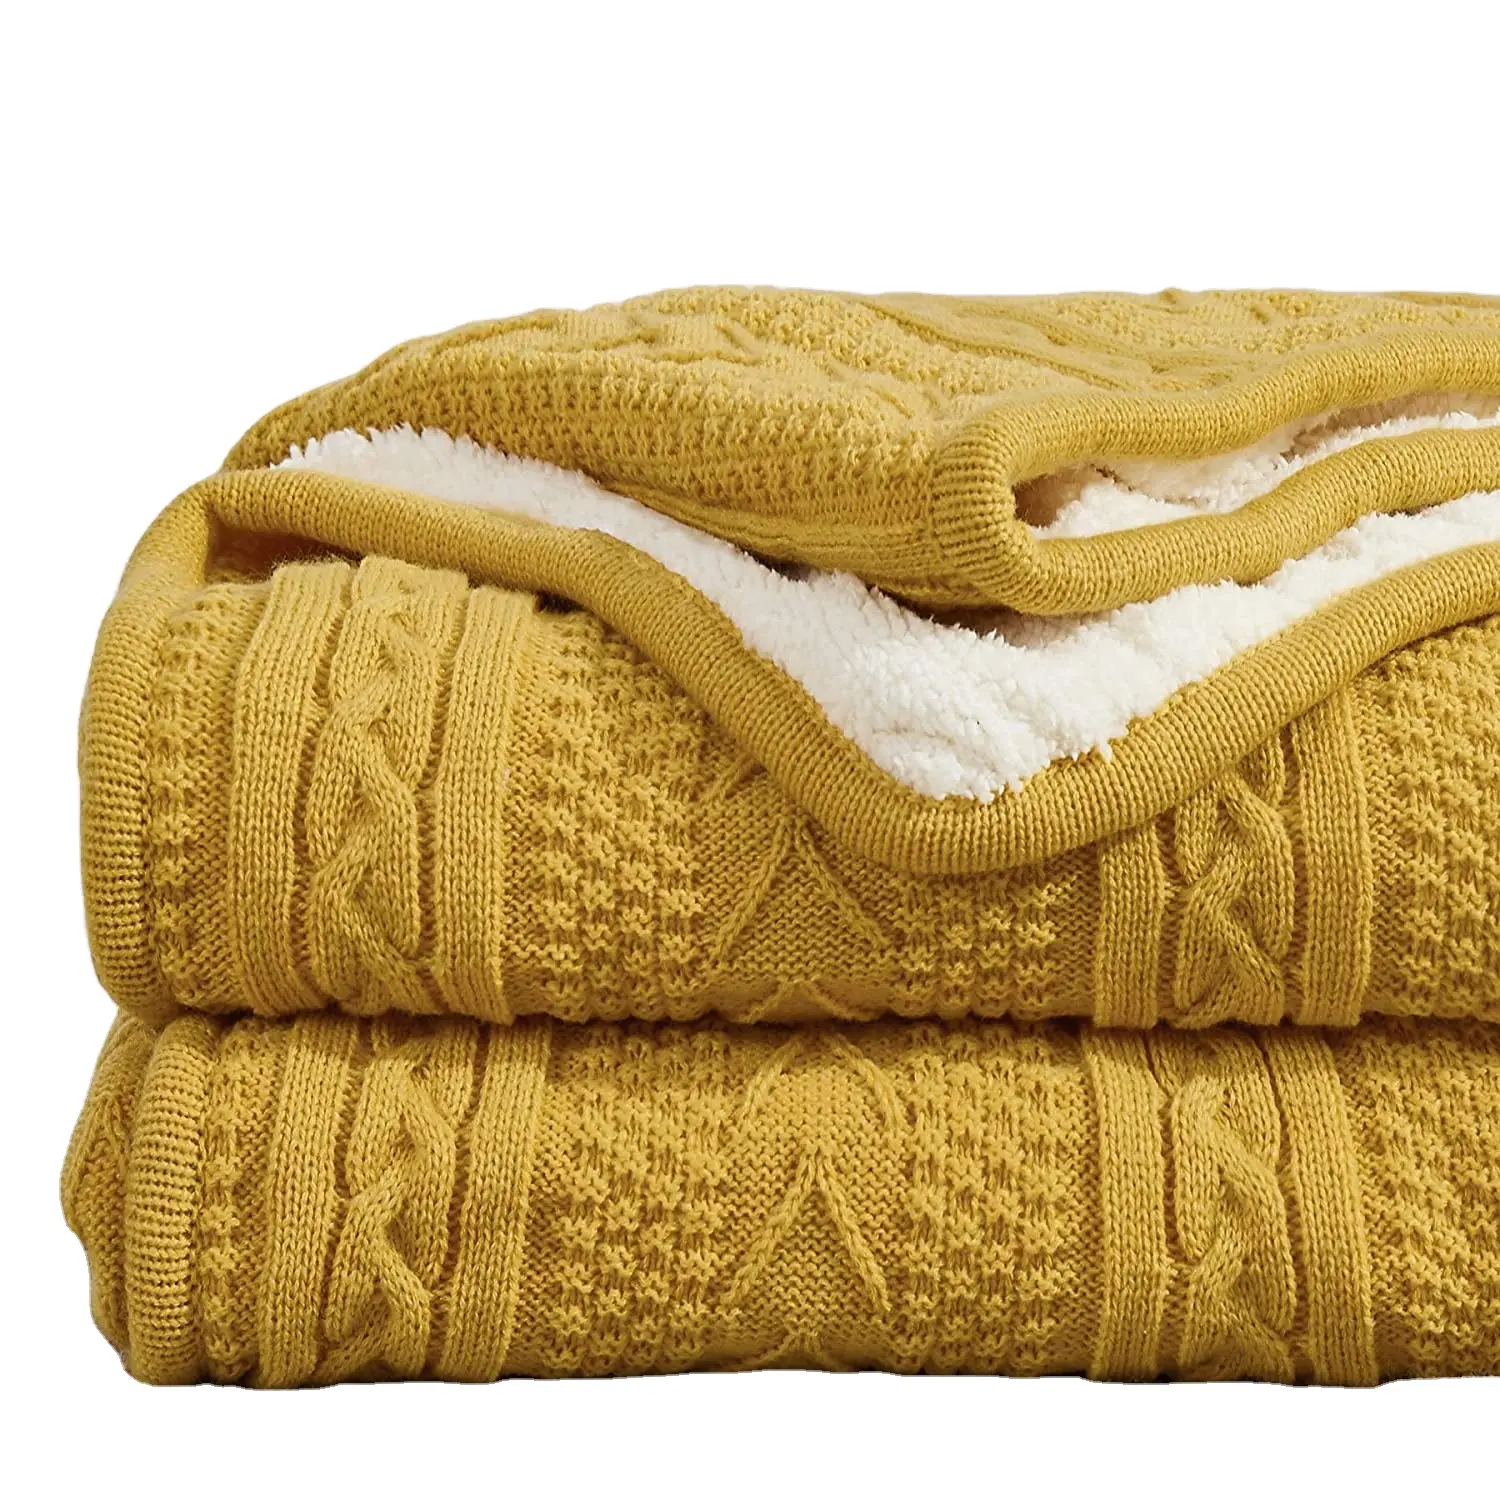 bedding Mustard Yellow 50 x 63 Inches Acrylic Cable Knit Sherpa Throw Blanket - Thick, Soft, Big, Cozy Yellow Knitted Fleece Bla